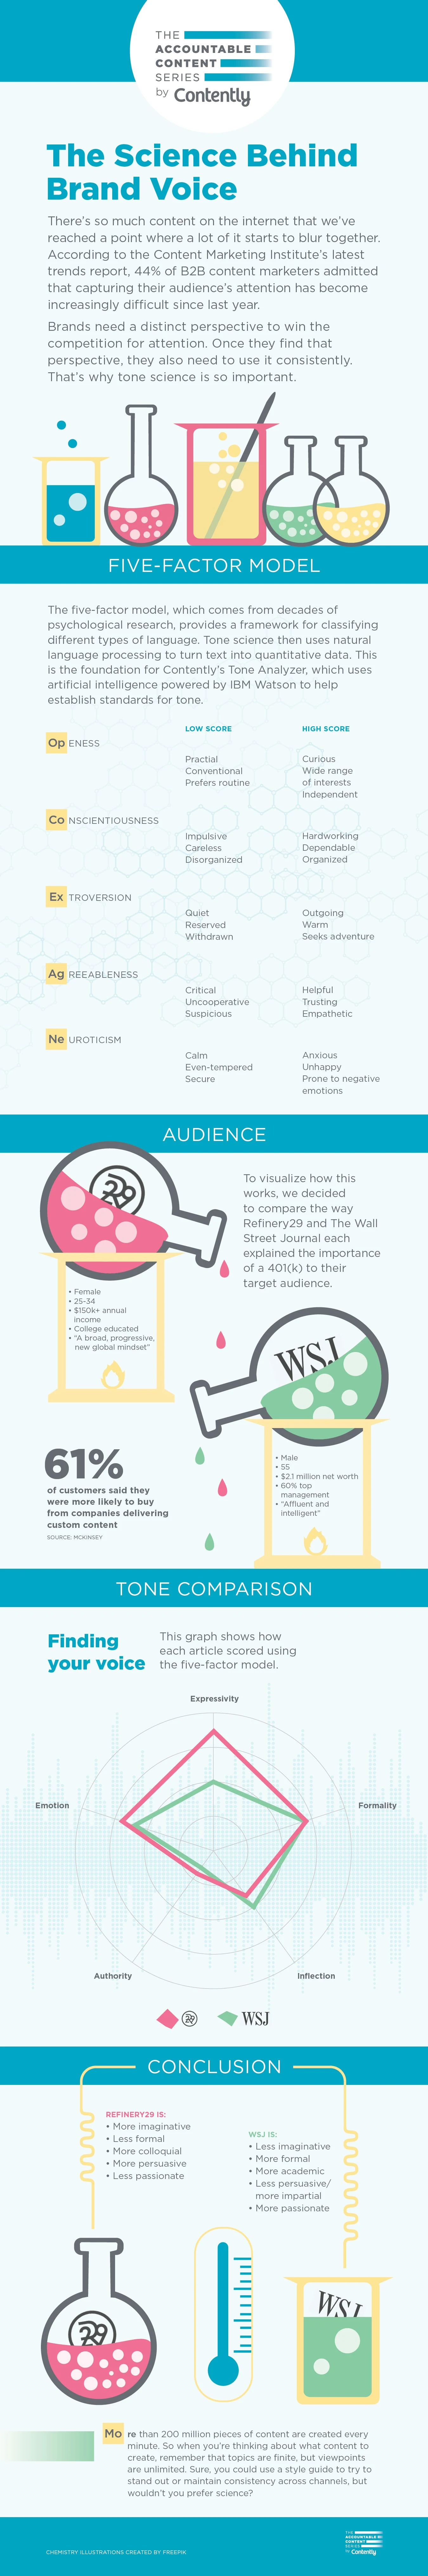 The Science Behind Brand Voice - #infographic